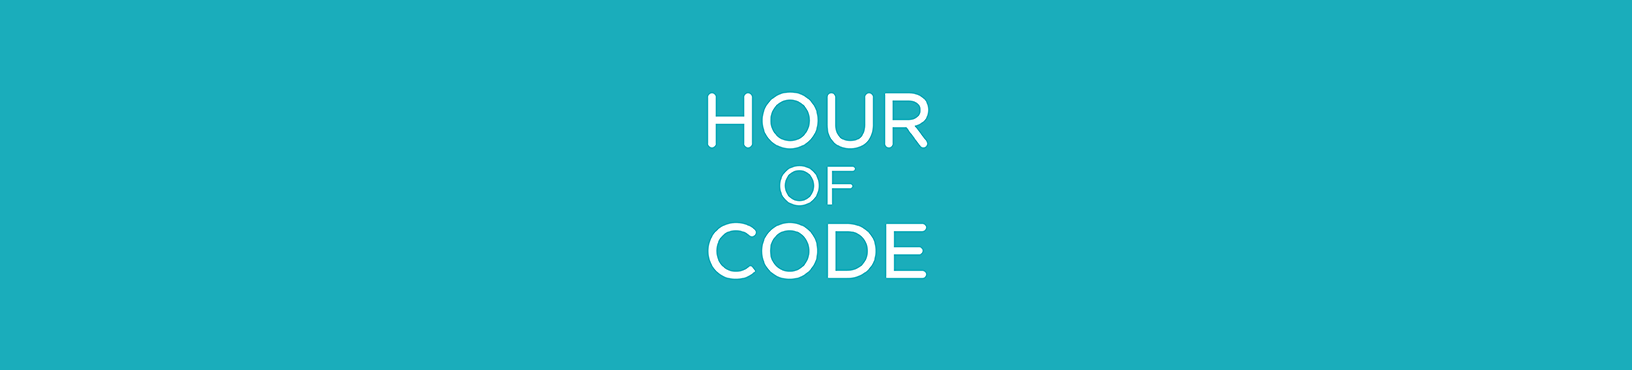 Learn Basic Lua Coding This Week In Our Hour Of Code Event Roblox Blog - code.org roblox code